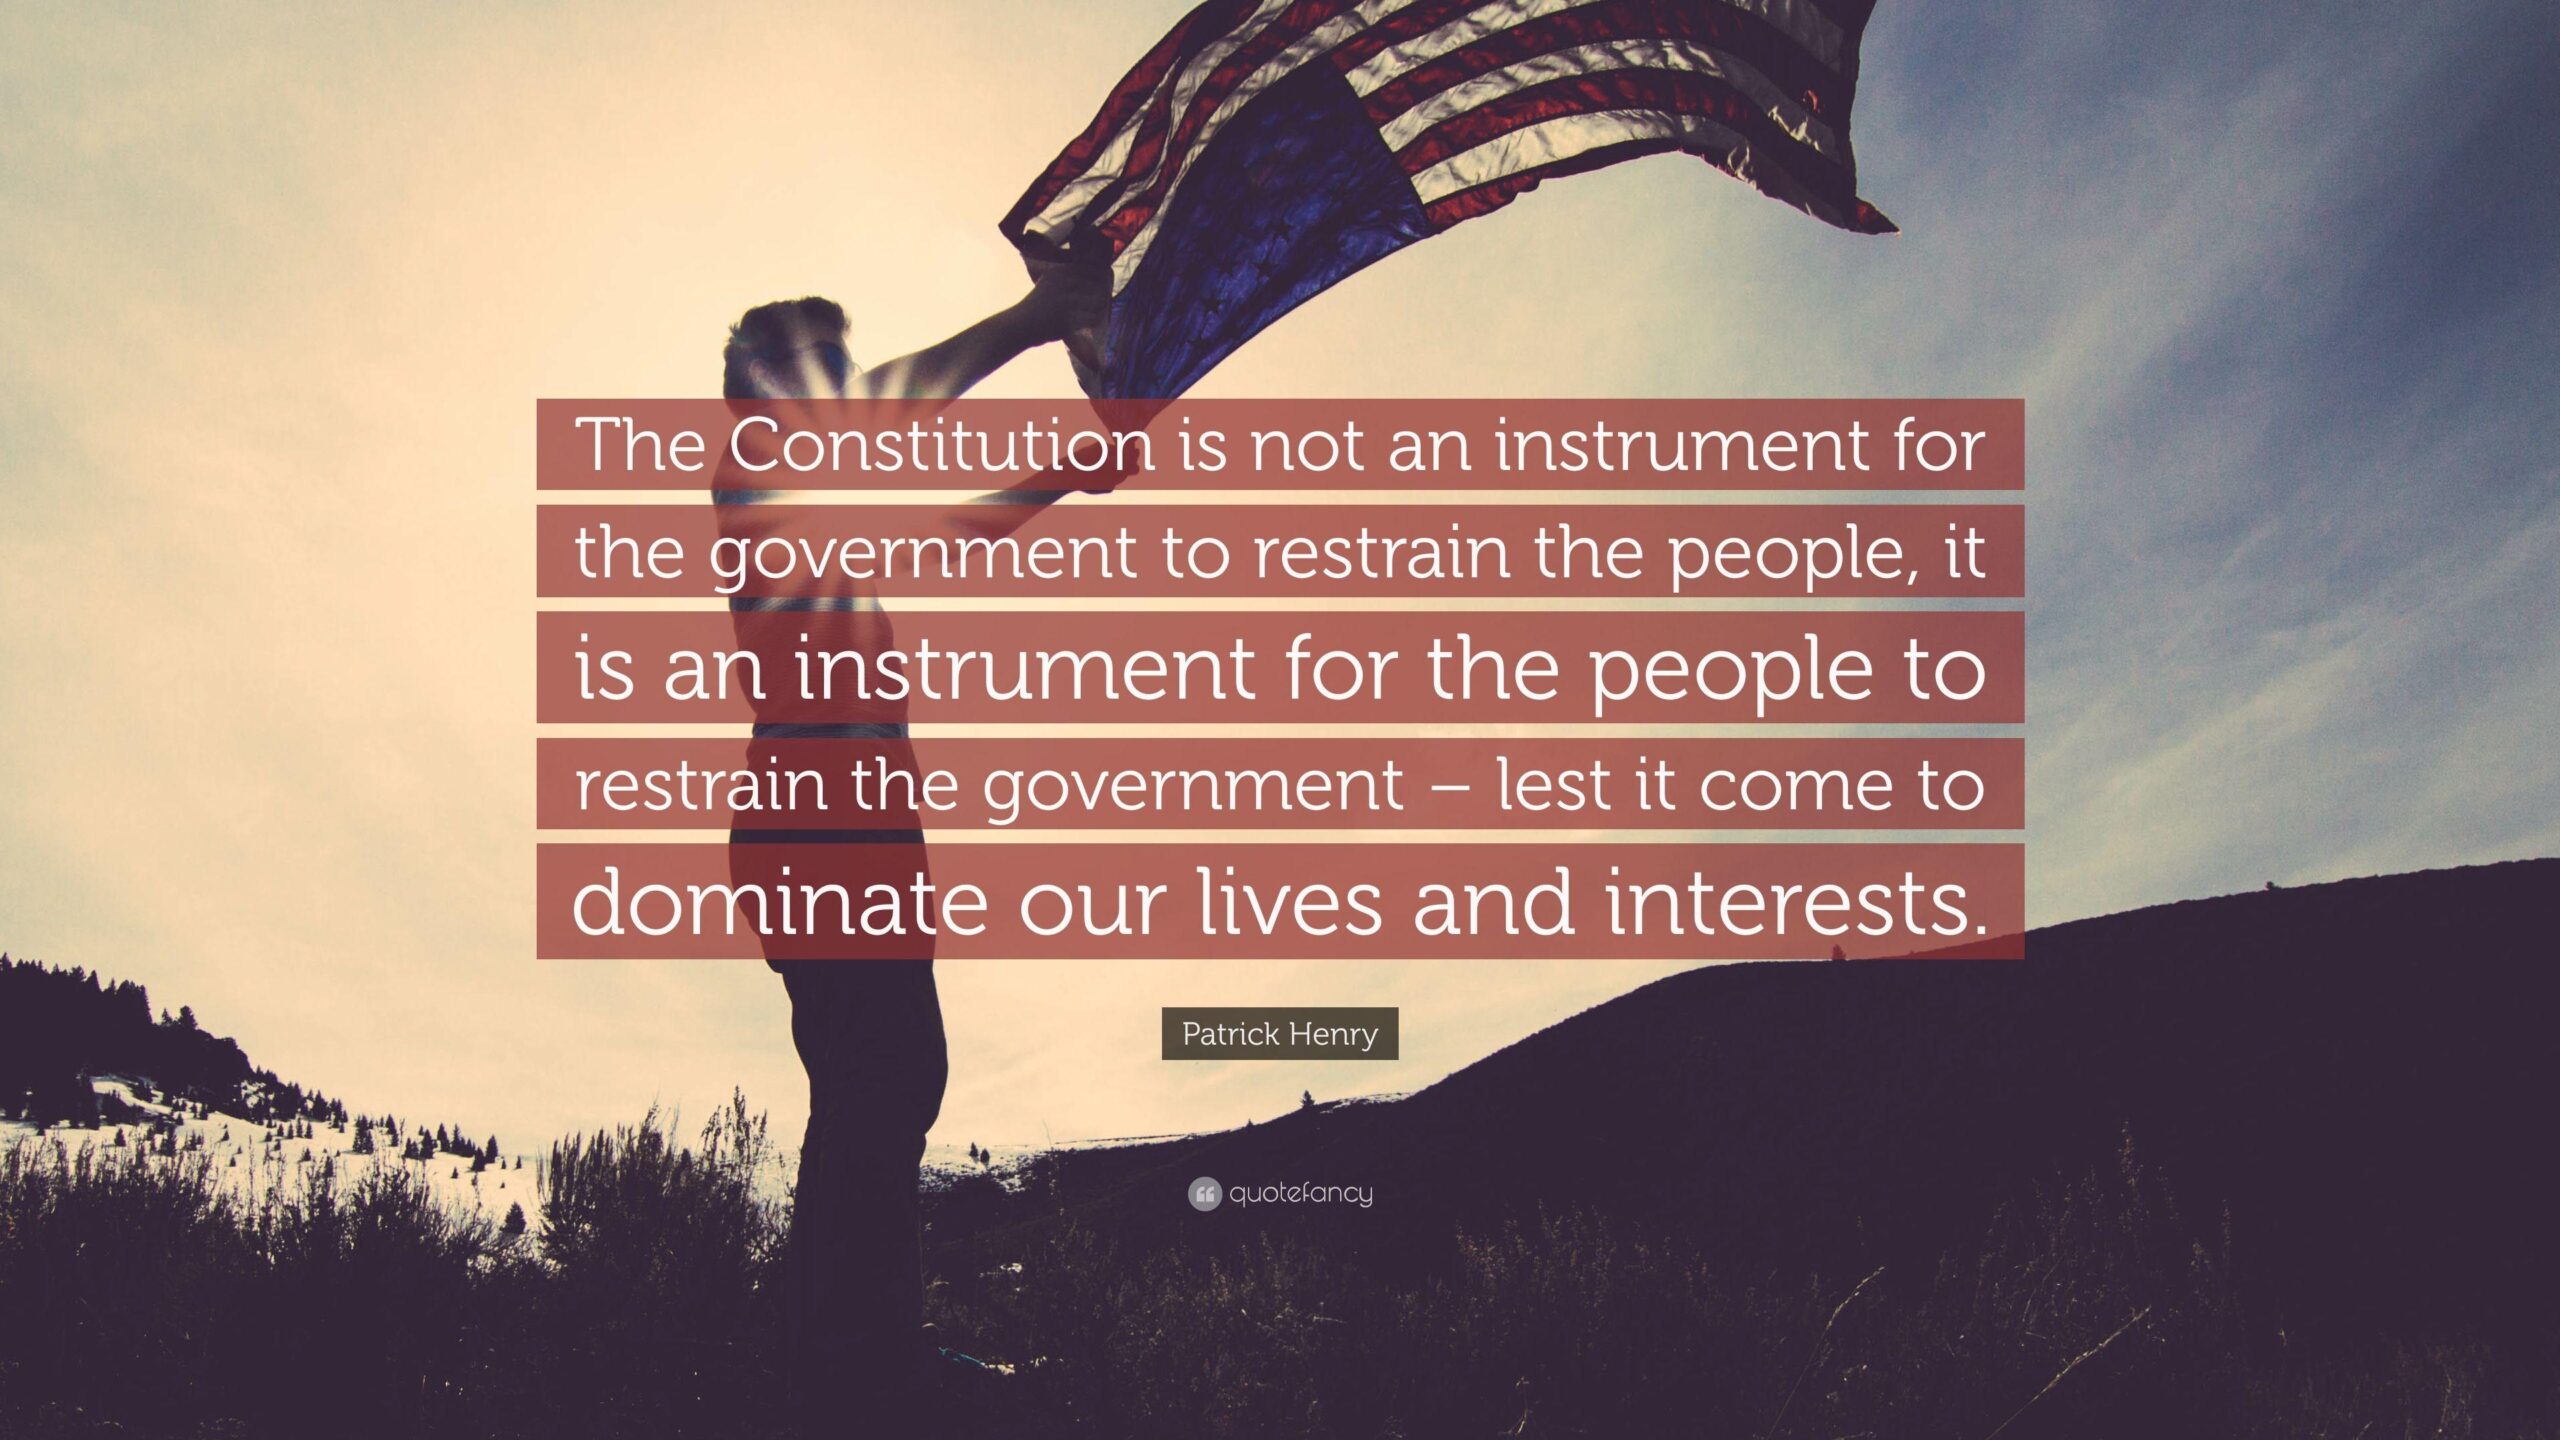 Patrick Henry Quote “The Constitution is not an instrument for the